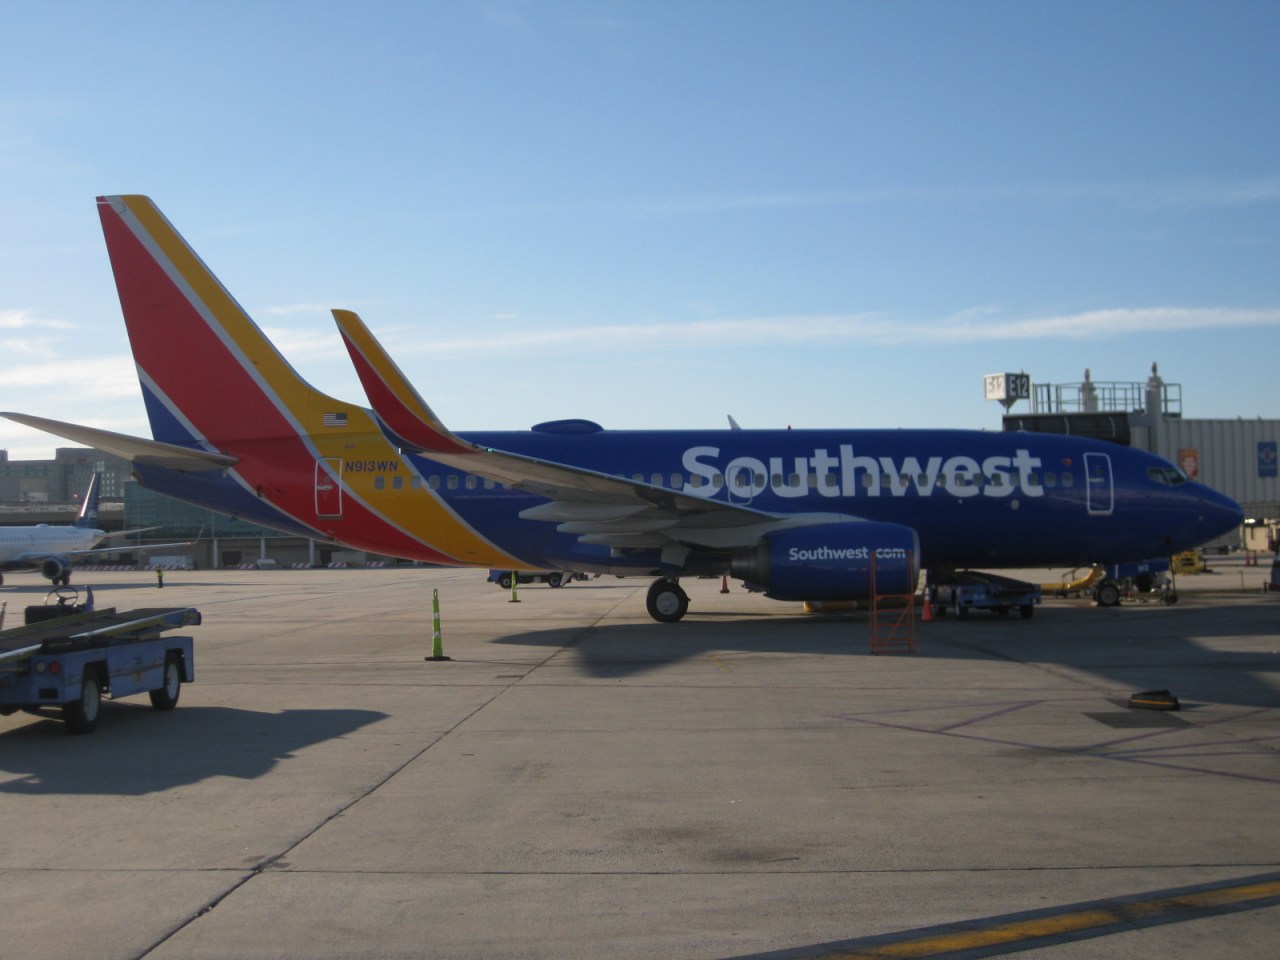 Southwest left passengers stranded all over the country. Photo: Wikimedia Commons